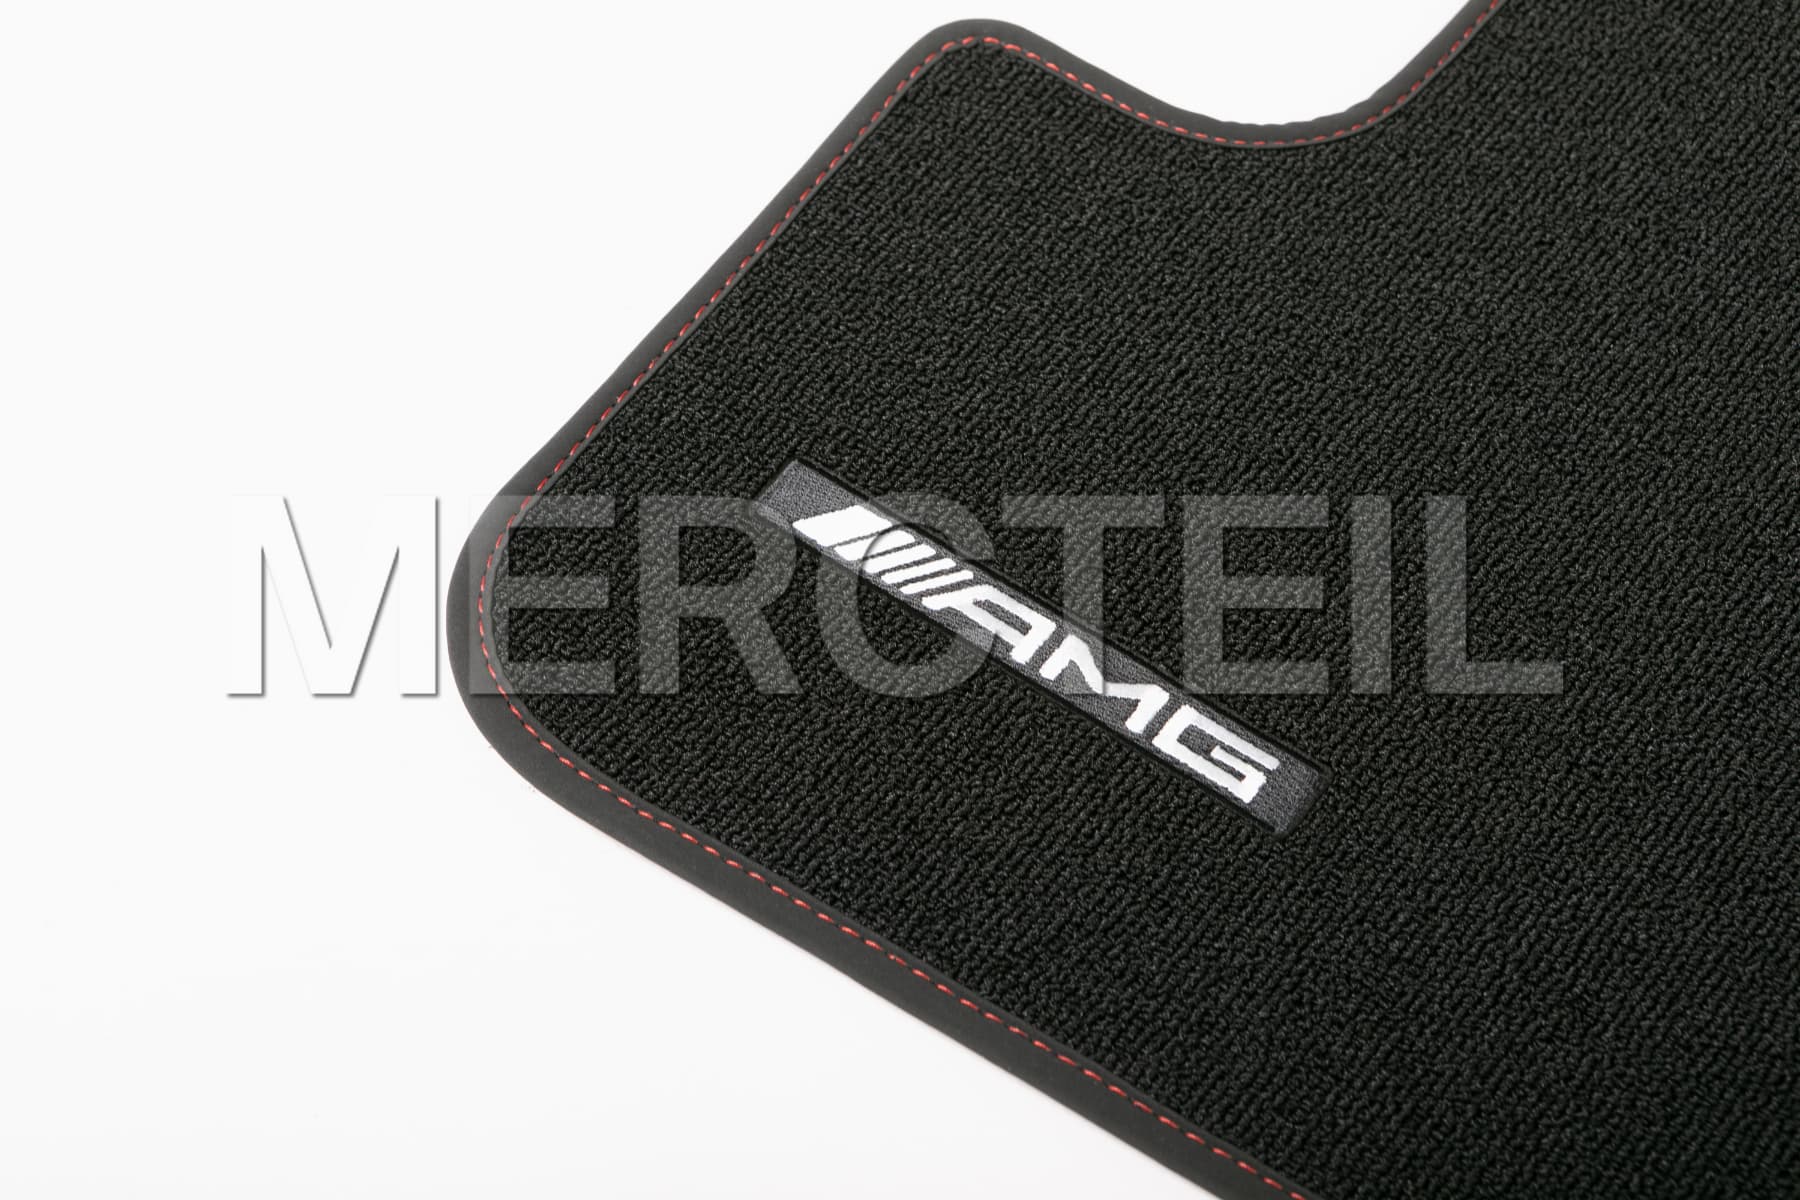 Black AMG Floor Mats with Red Stitching Genuine Mercedes-AMG (Part number: A17668067013D16)